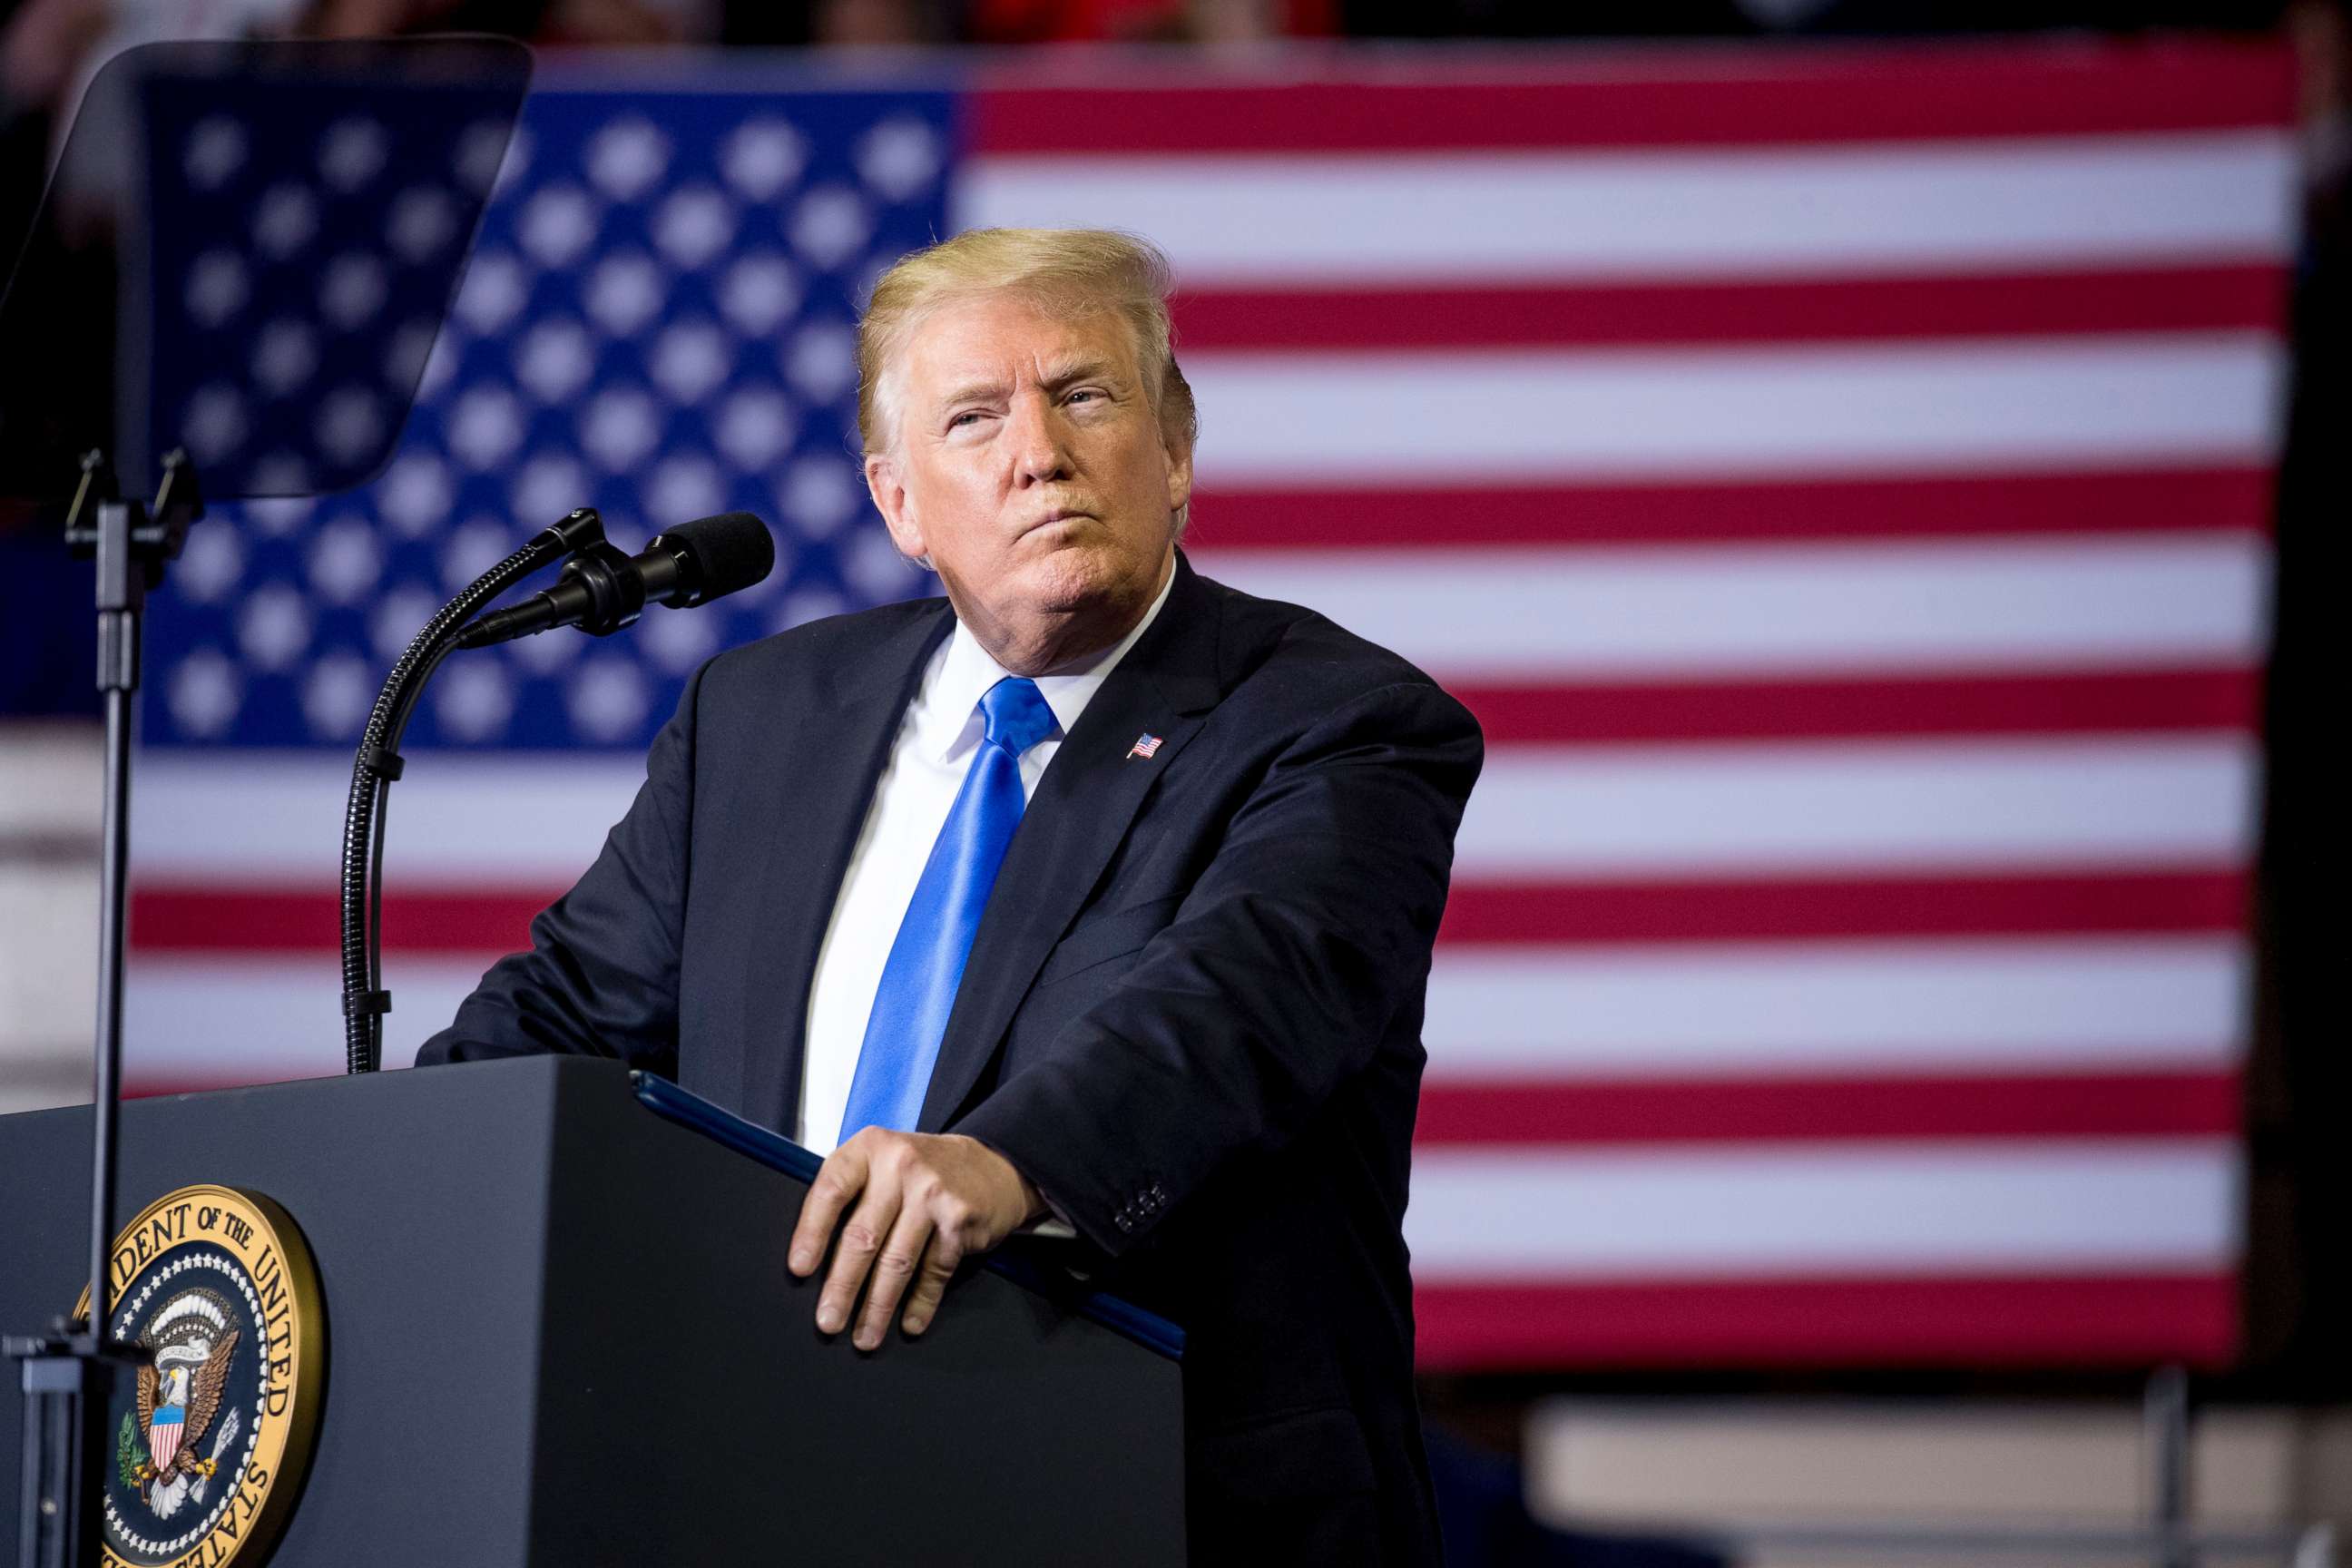 PHOTO: President Donald Trump pauses while speaking at a rally at Alumni Coliseum in Richmond, Ky., Oct. 13, 2018.